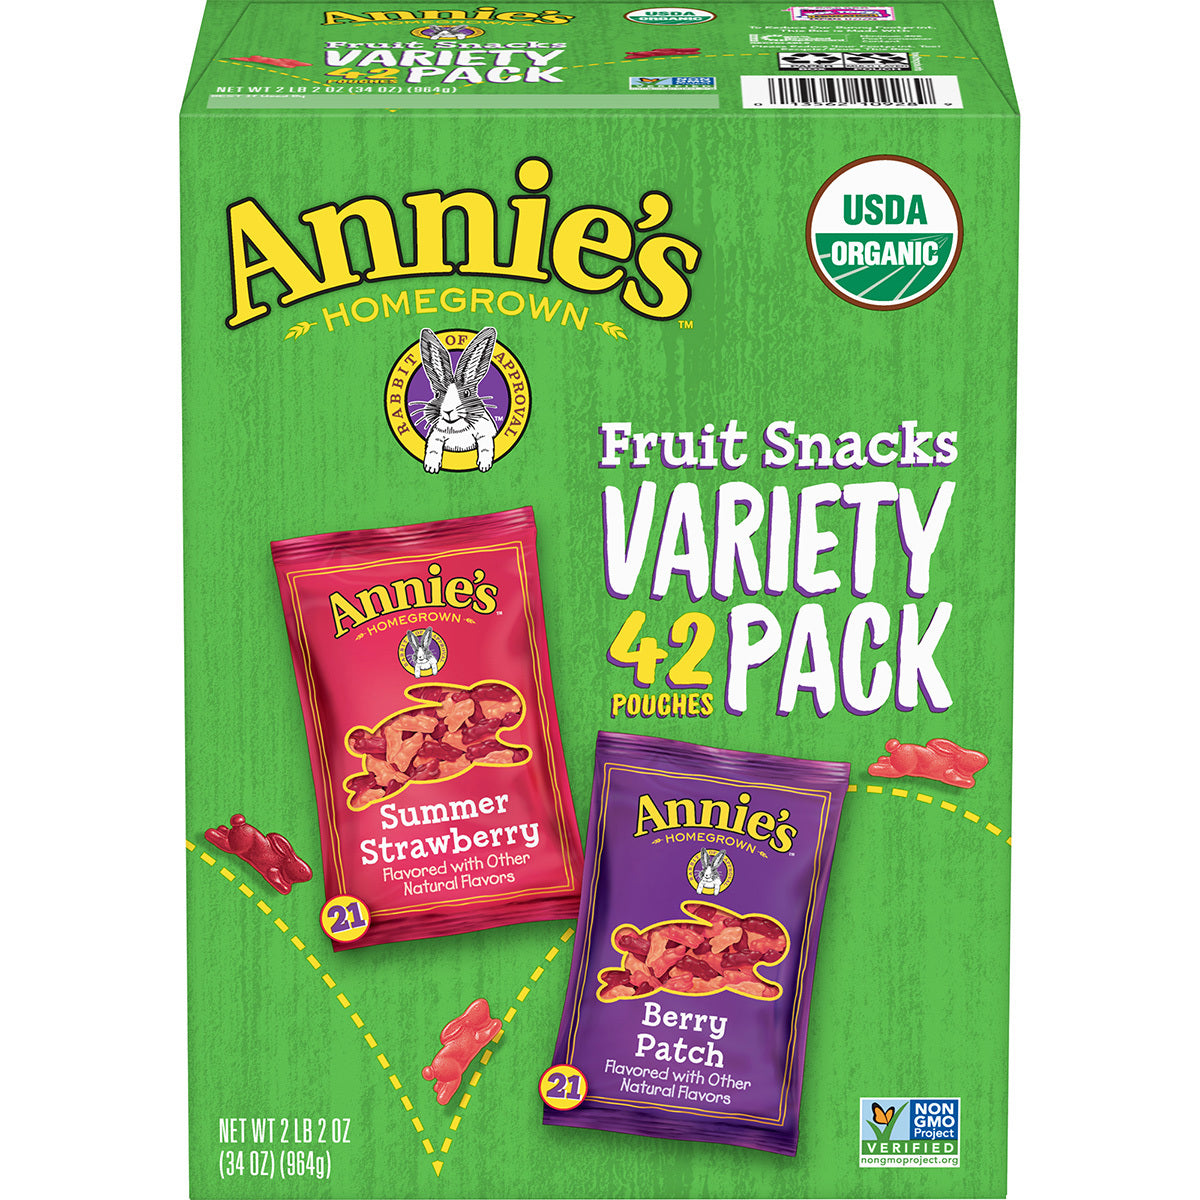 Annie's Homegrown Organic Bunny Snacks Variety Pack - Shop Cookies